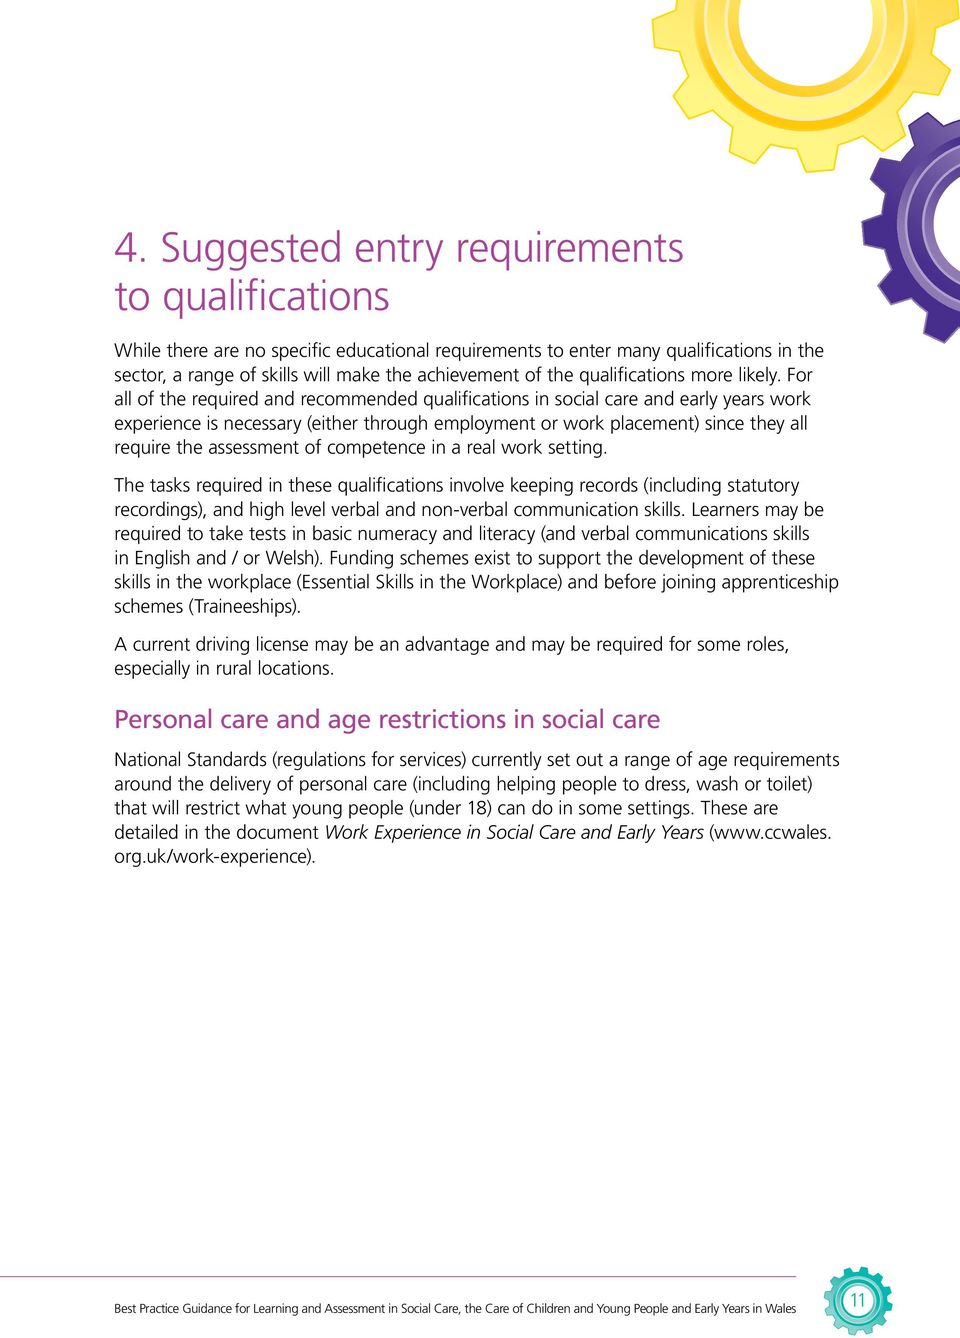 For all of the required and recommended qualifications in social care and early years work experience is necessary (either through employment or work placement) since they all require the assessment